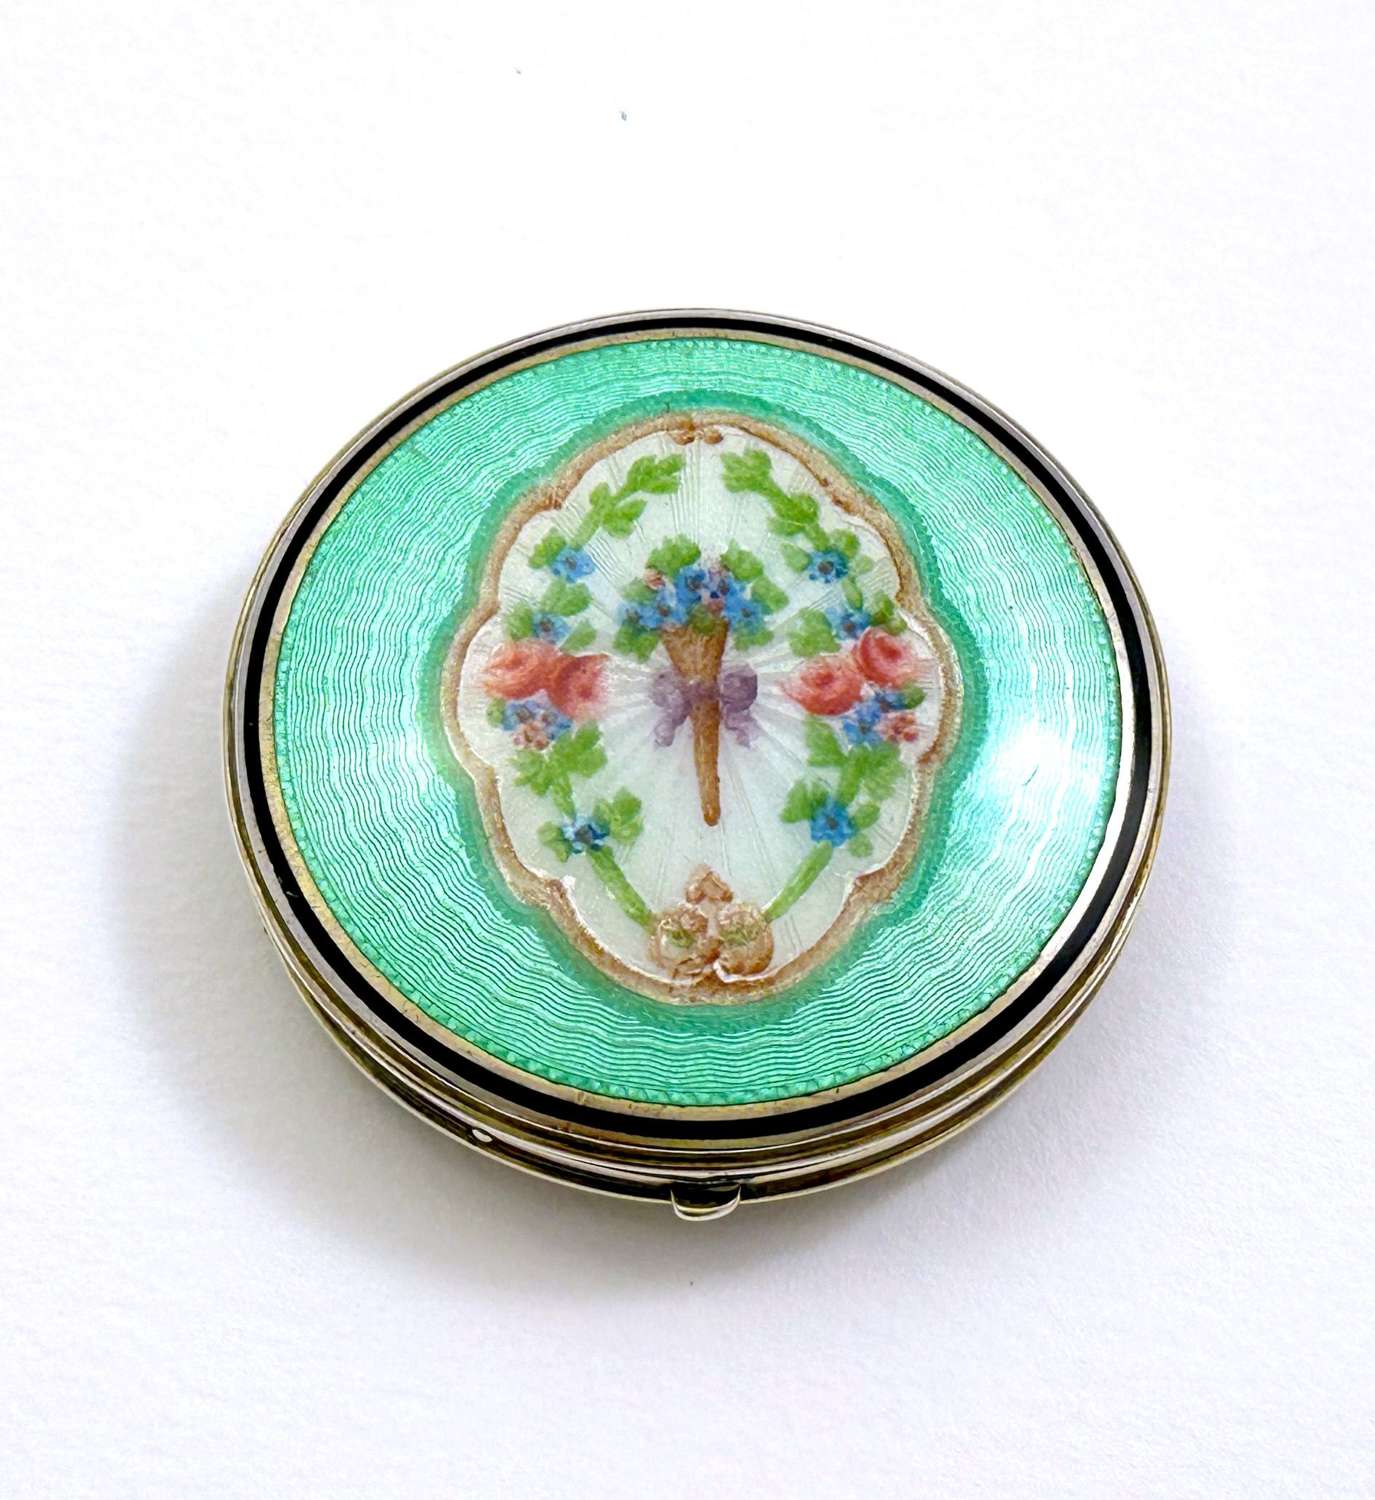 Antique Silver and Mint Green Guilloche Enamel Compact Case.